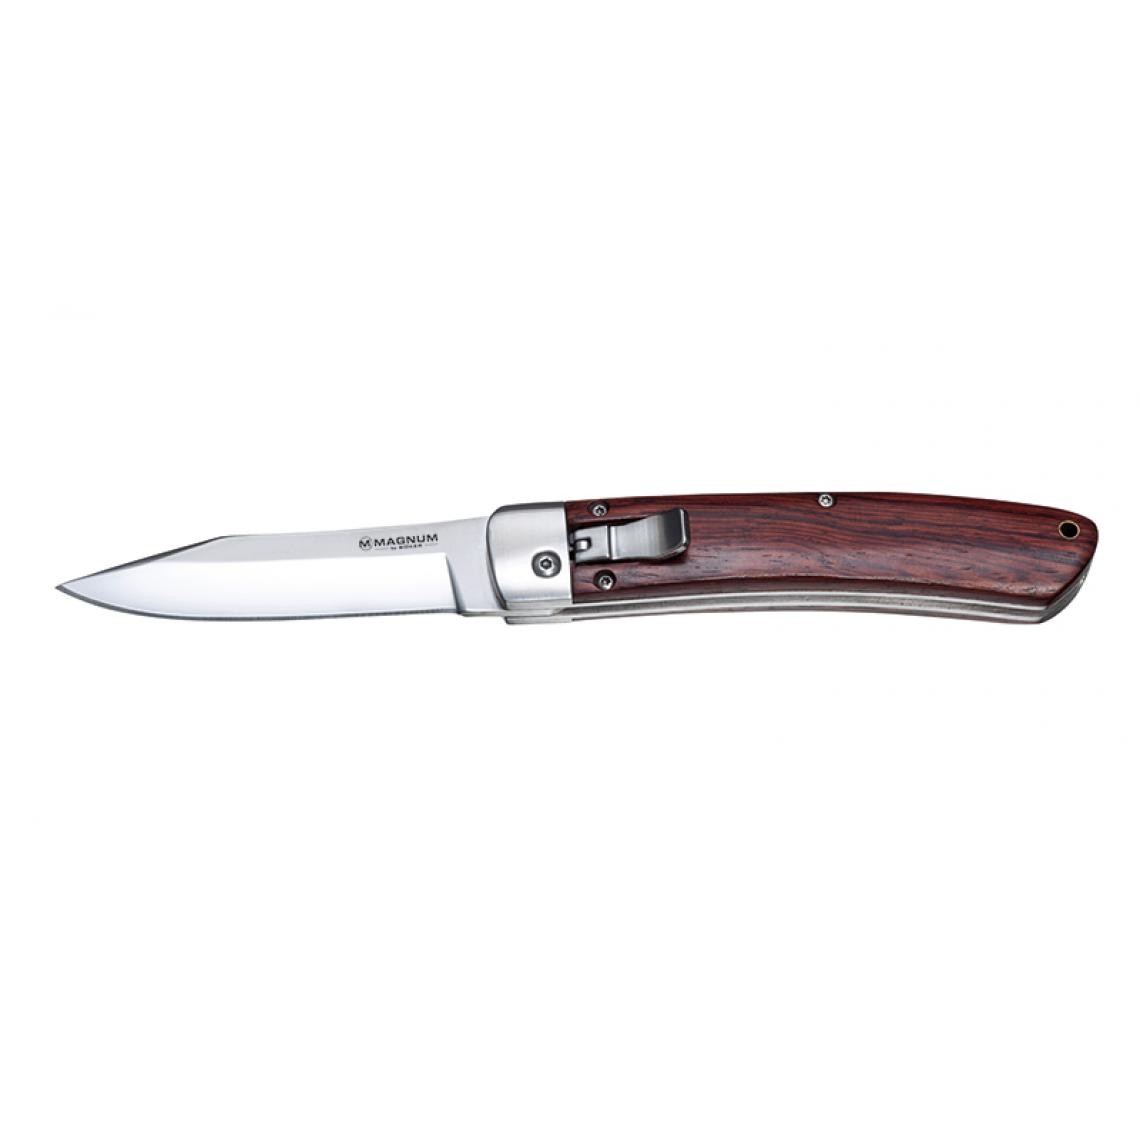 Boker - BOKER MAGNUM - 01RY911 - BOKER MAGNUM - AUTOMATIC CLASSIC - Outils de coupe